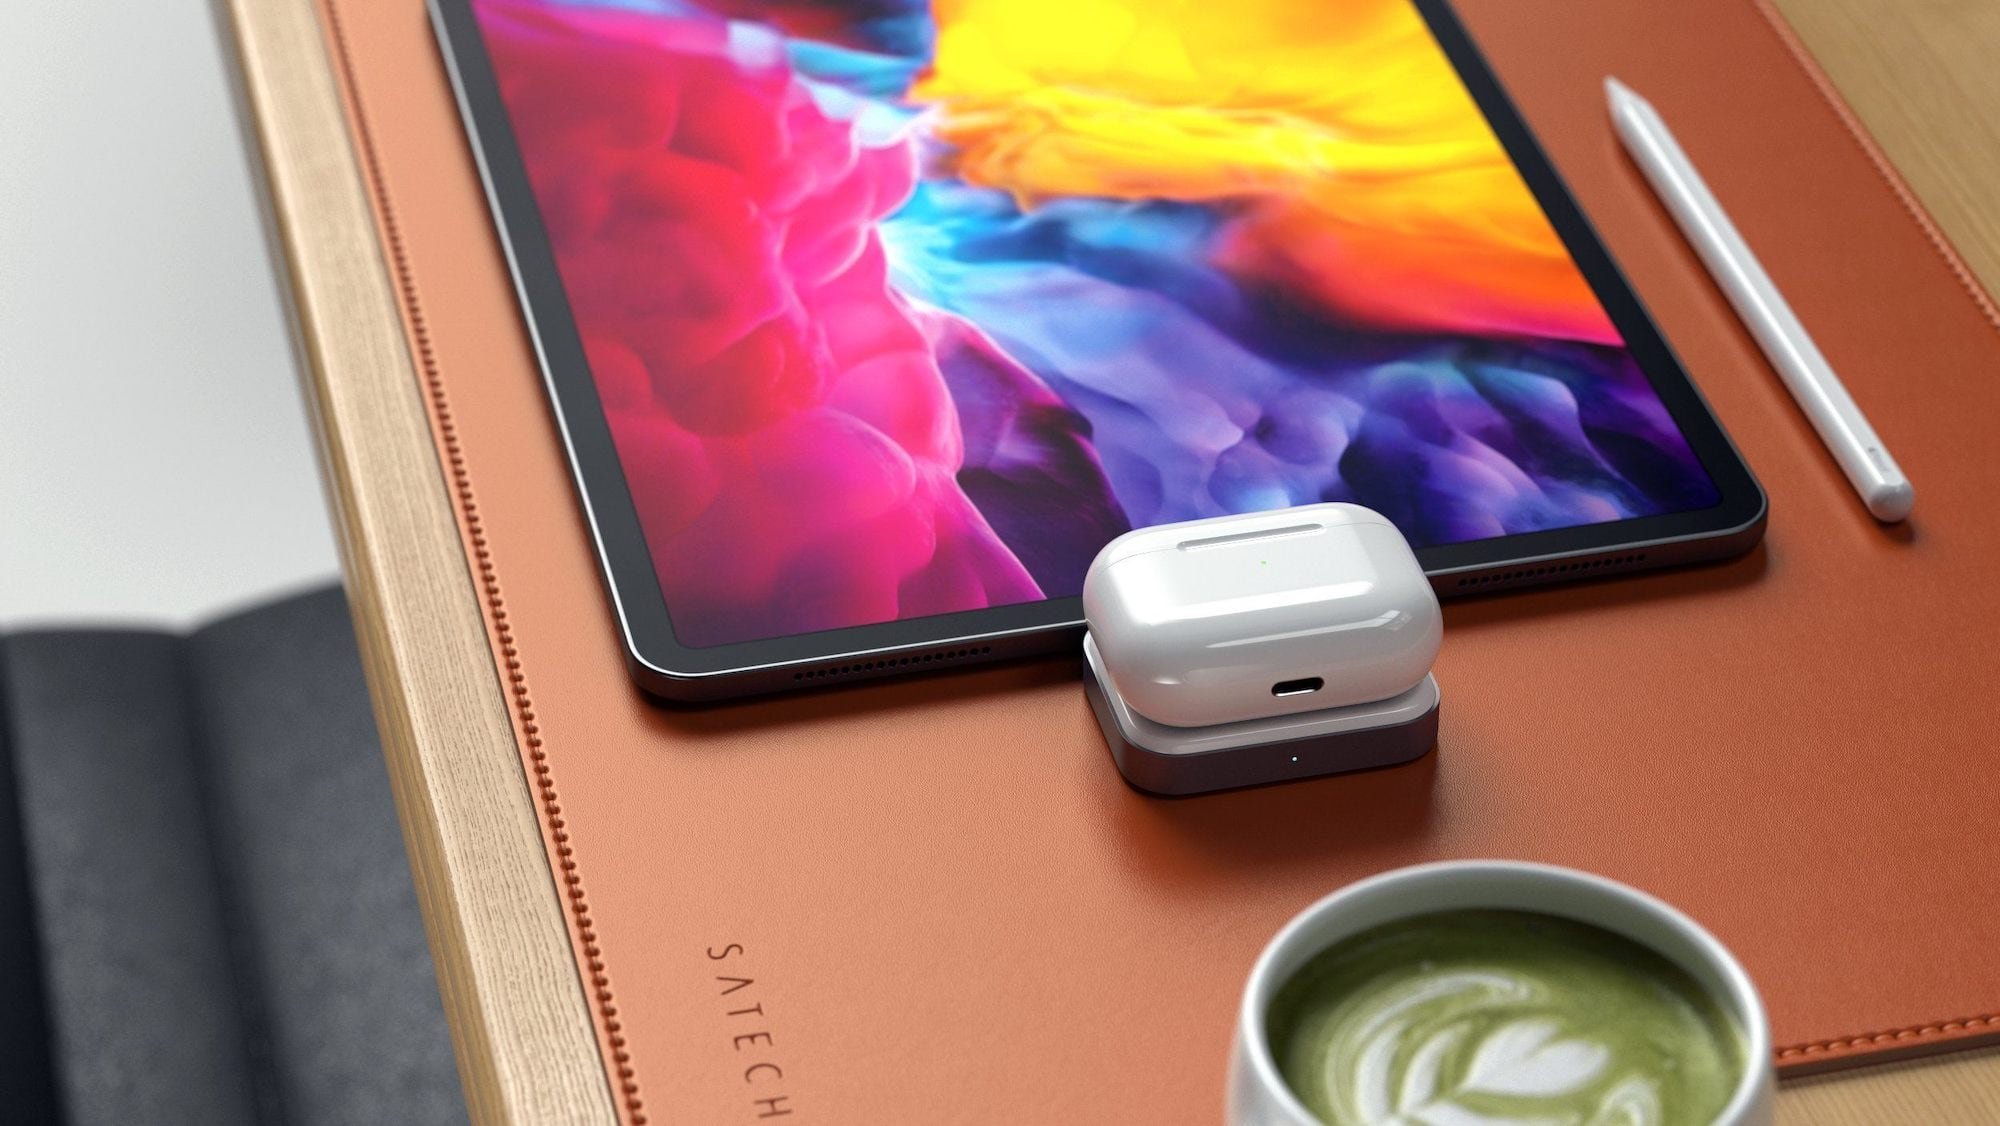 Satechi USB-C Compact Wireless Charging Dock powers up your AirPods and AirPods Pro